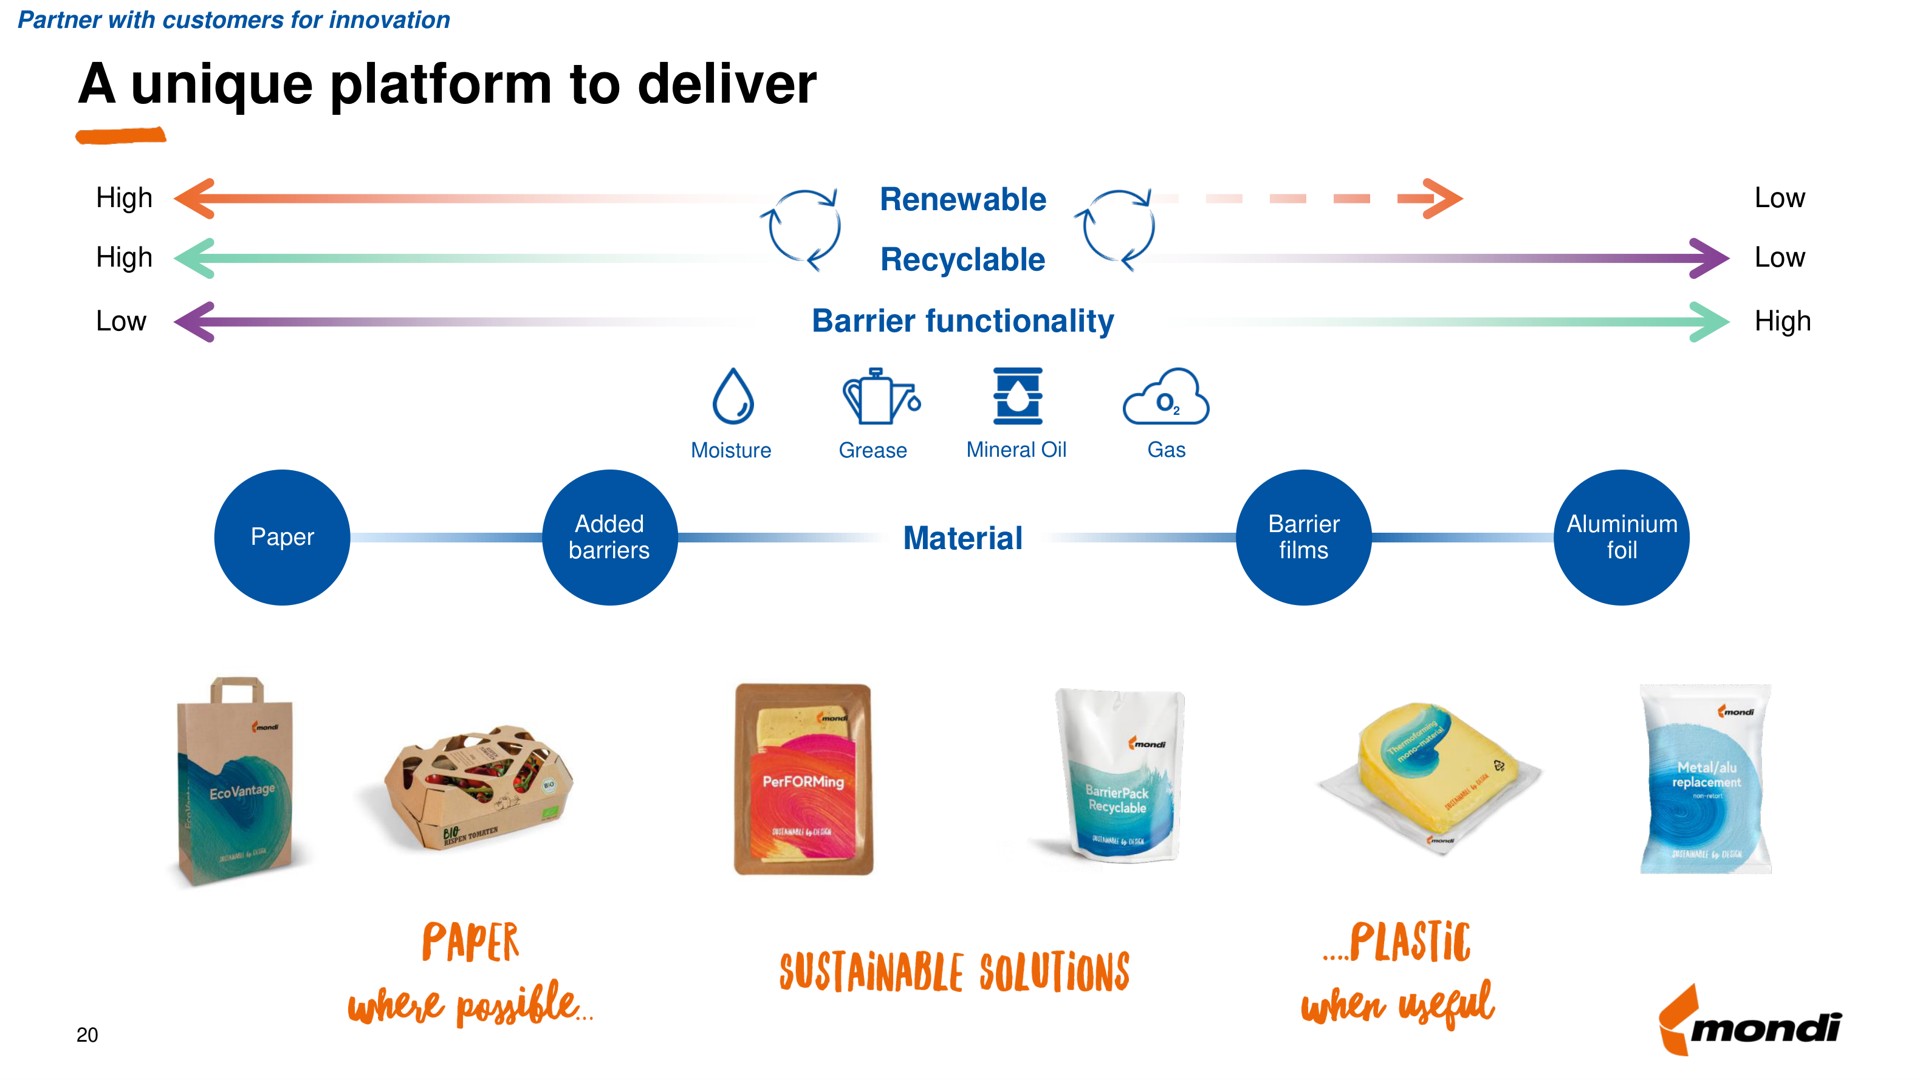 a unique platform to deliver where sustainable solutions plastic when useful | Mondi